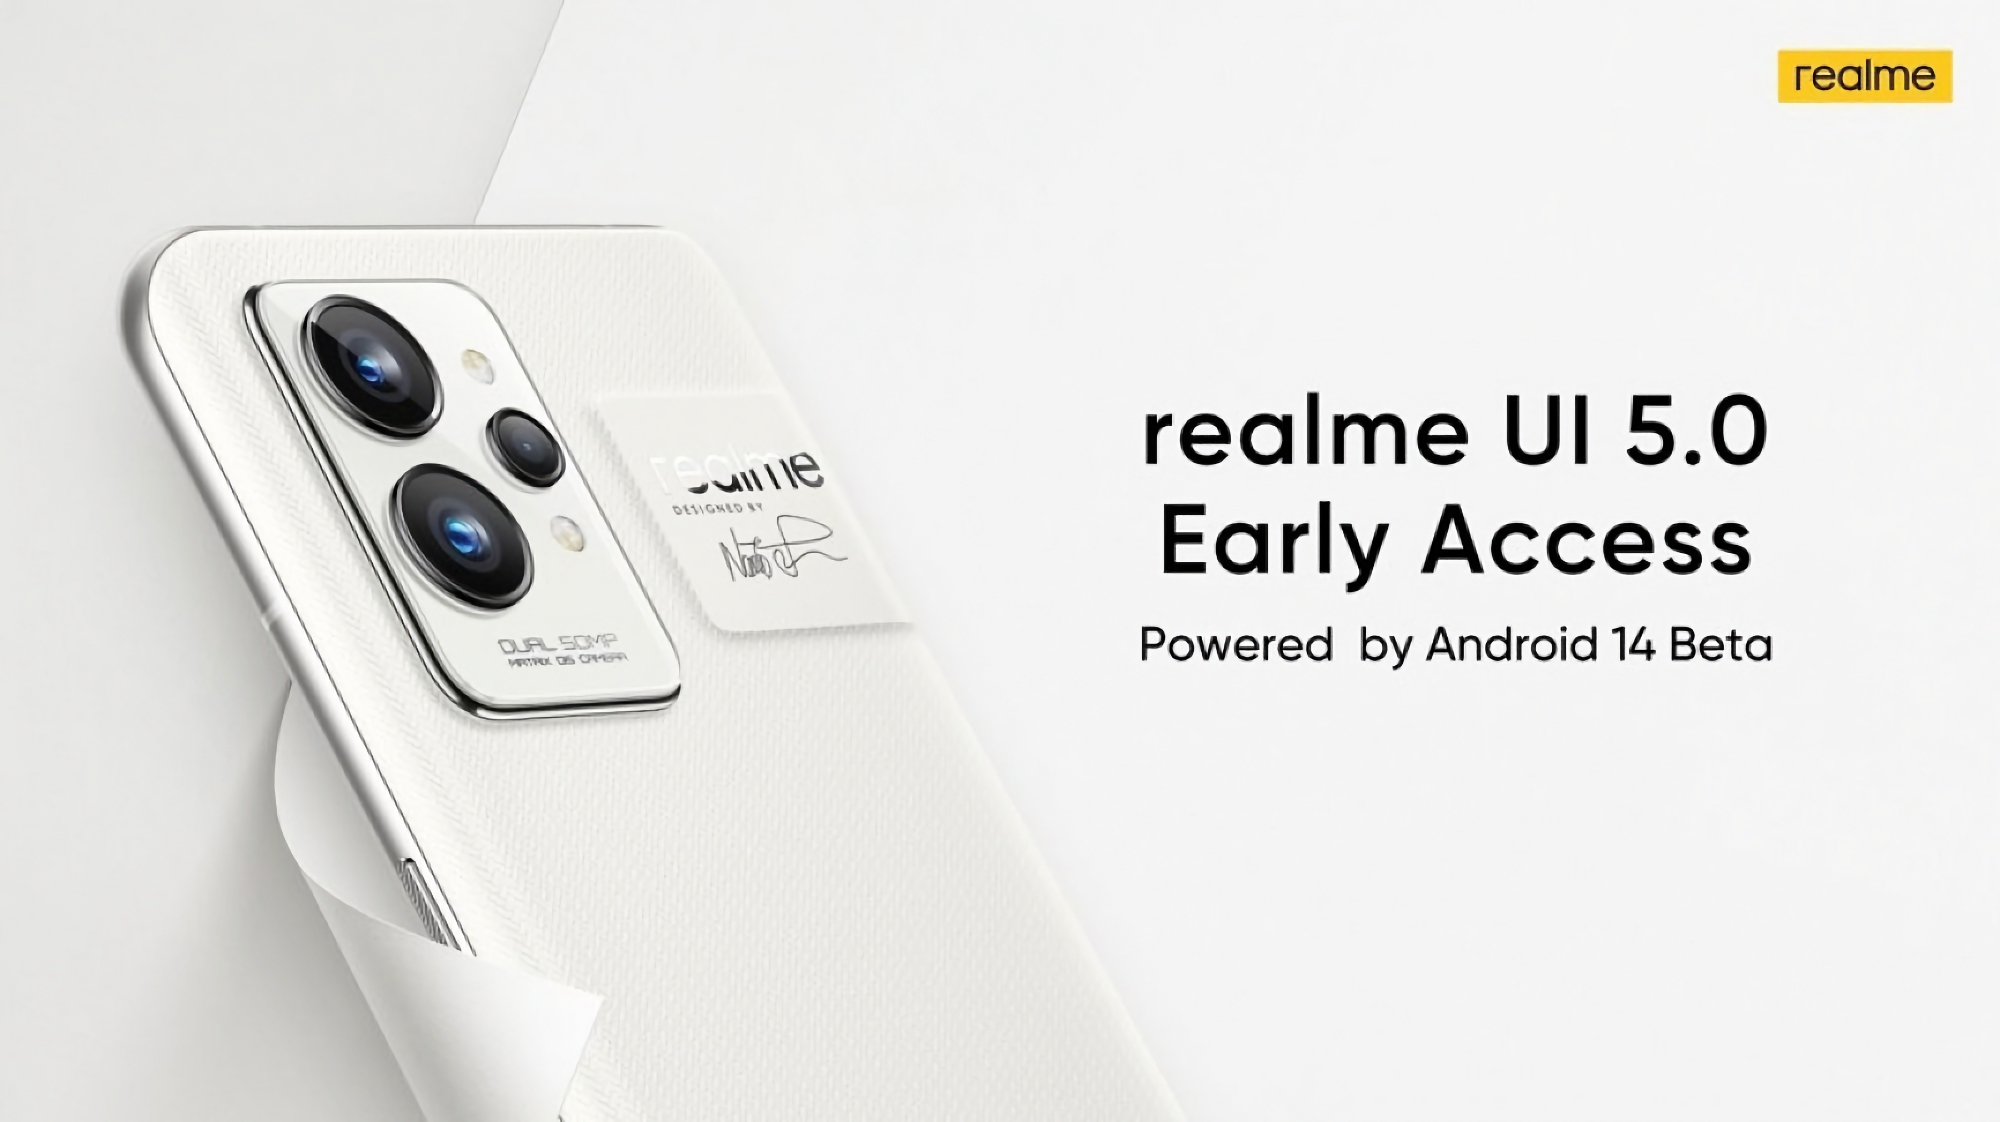 realme has revealed when and which smartphones of the company will get Android 14 with realme UI 5